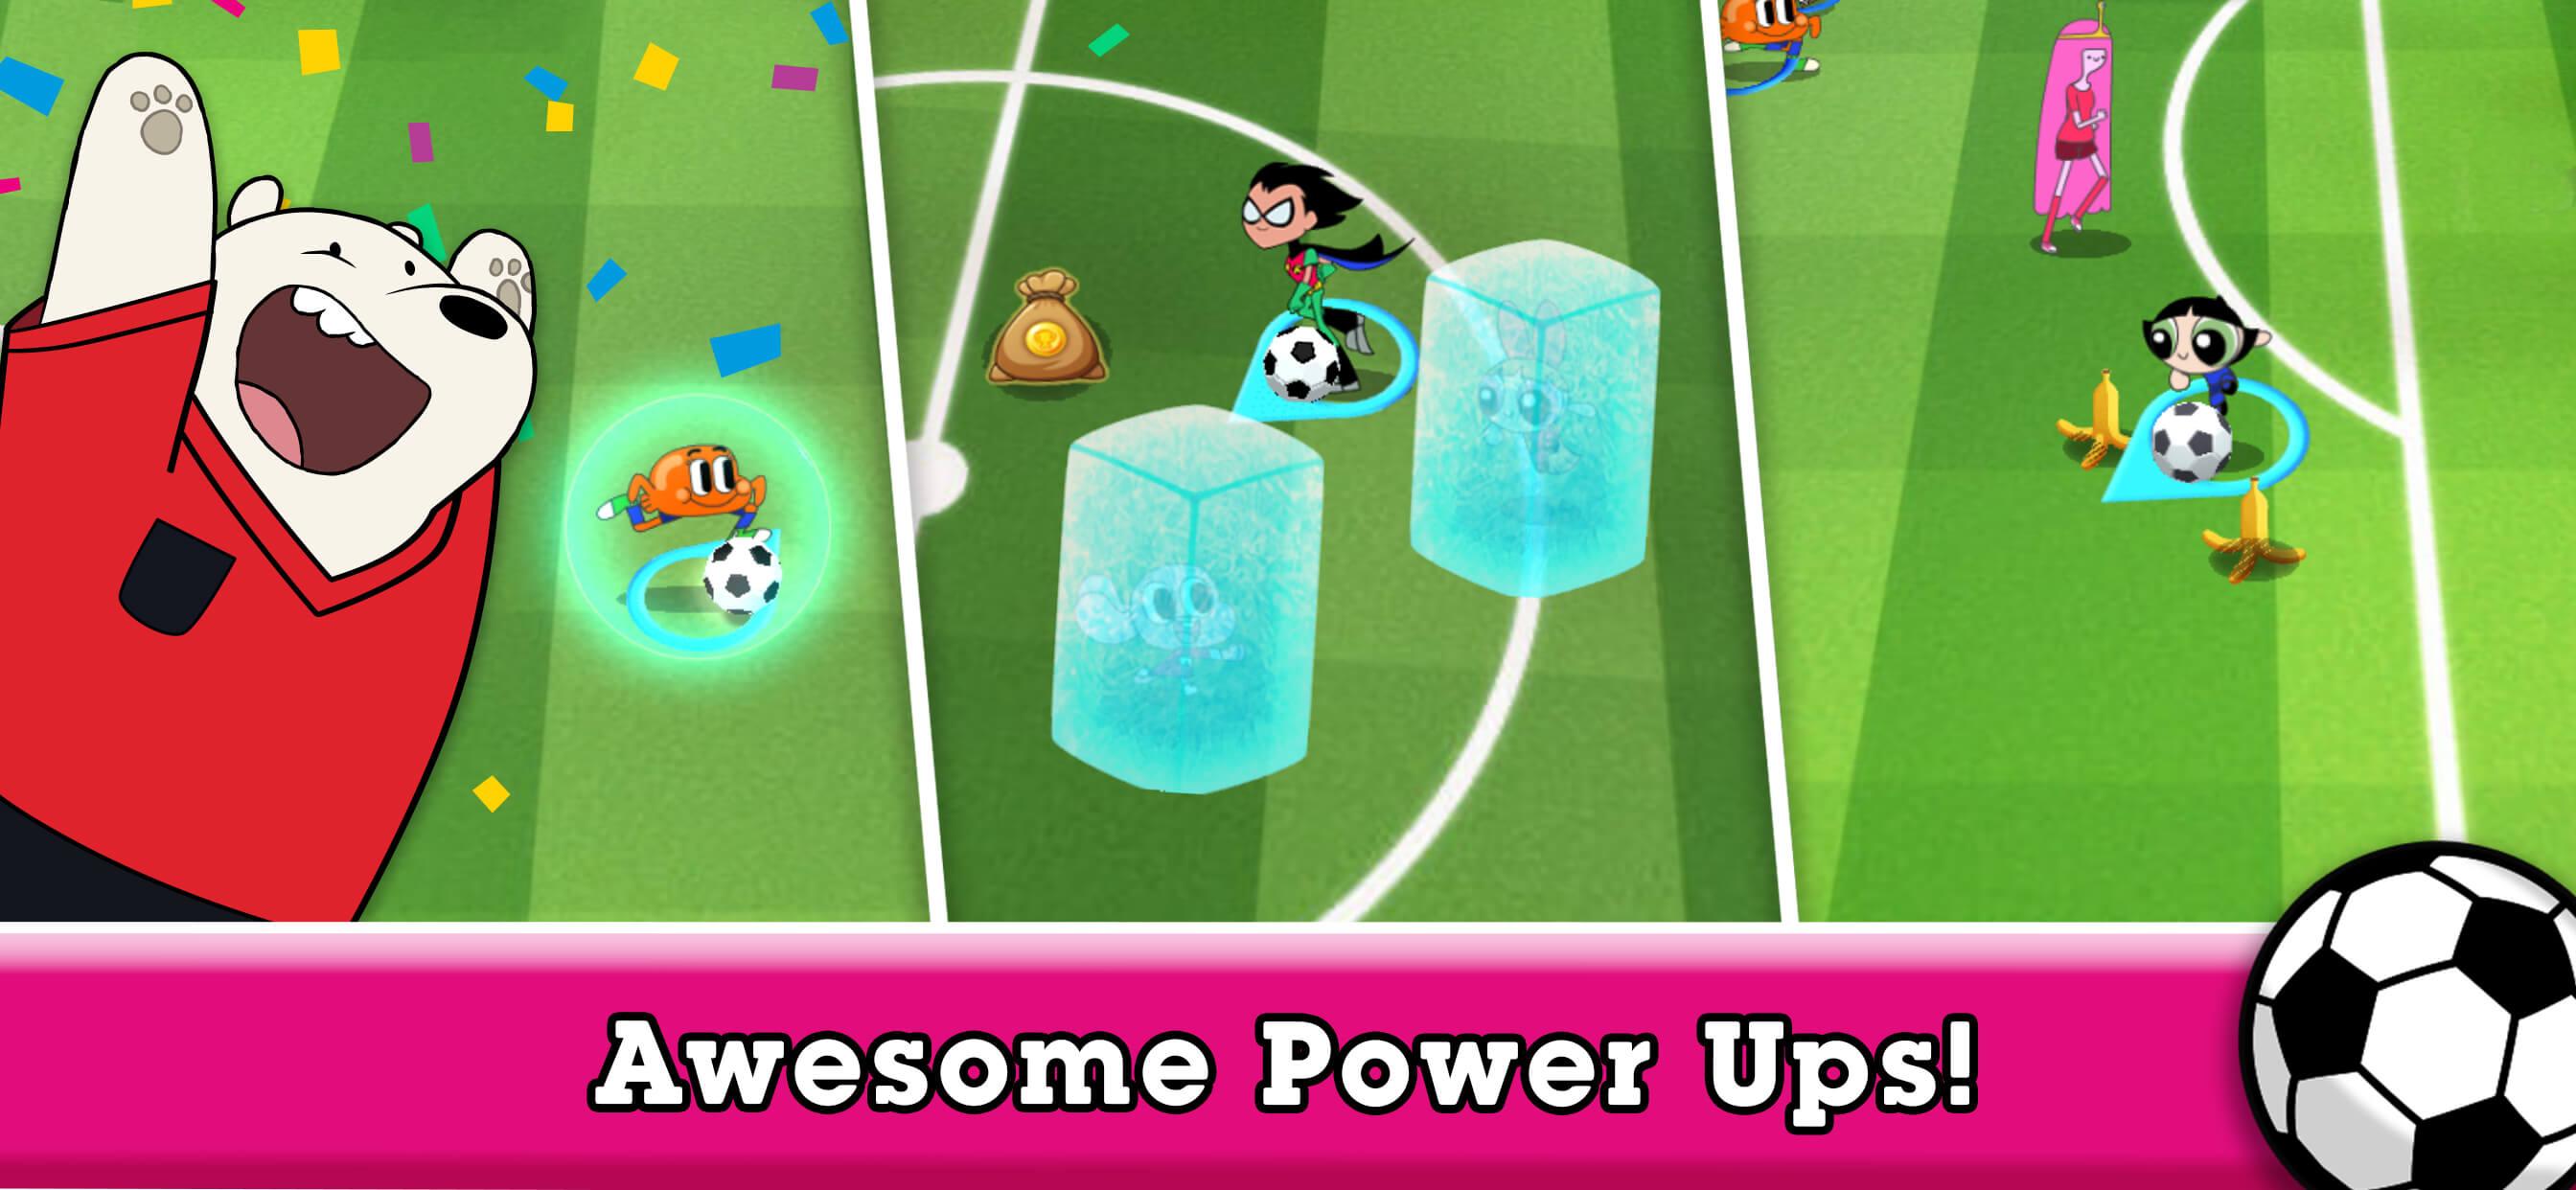 Toon Cup 2021 for Android - APK Download